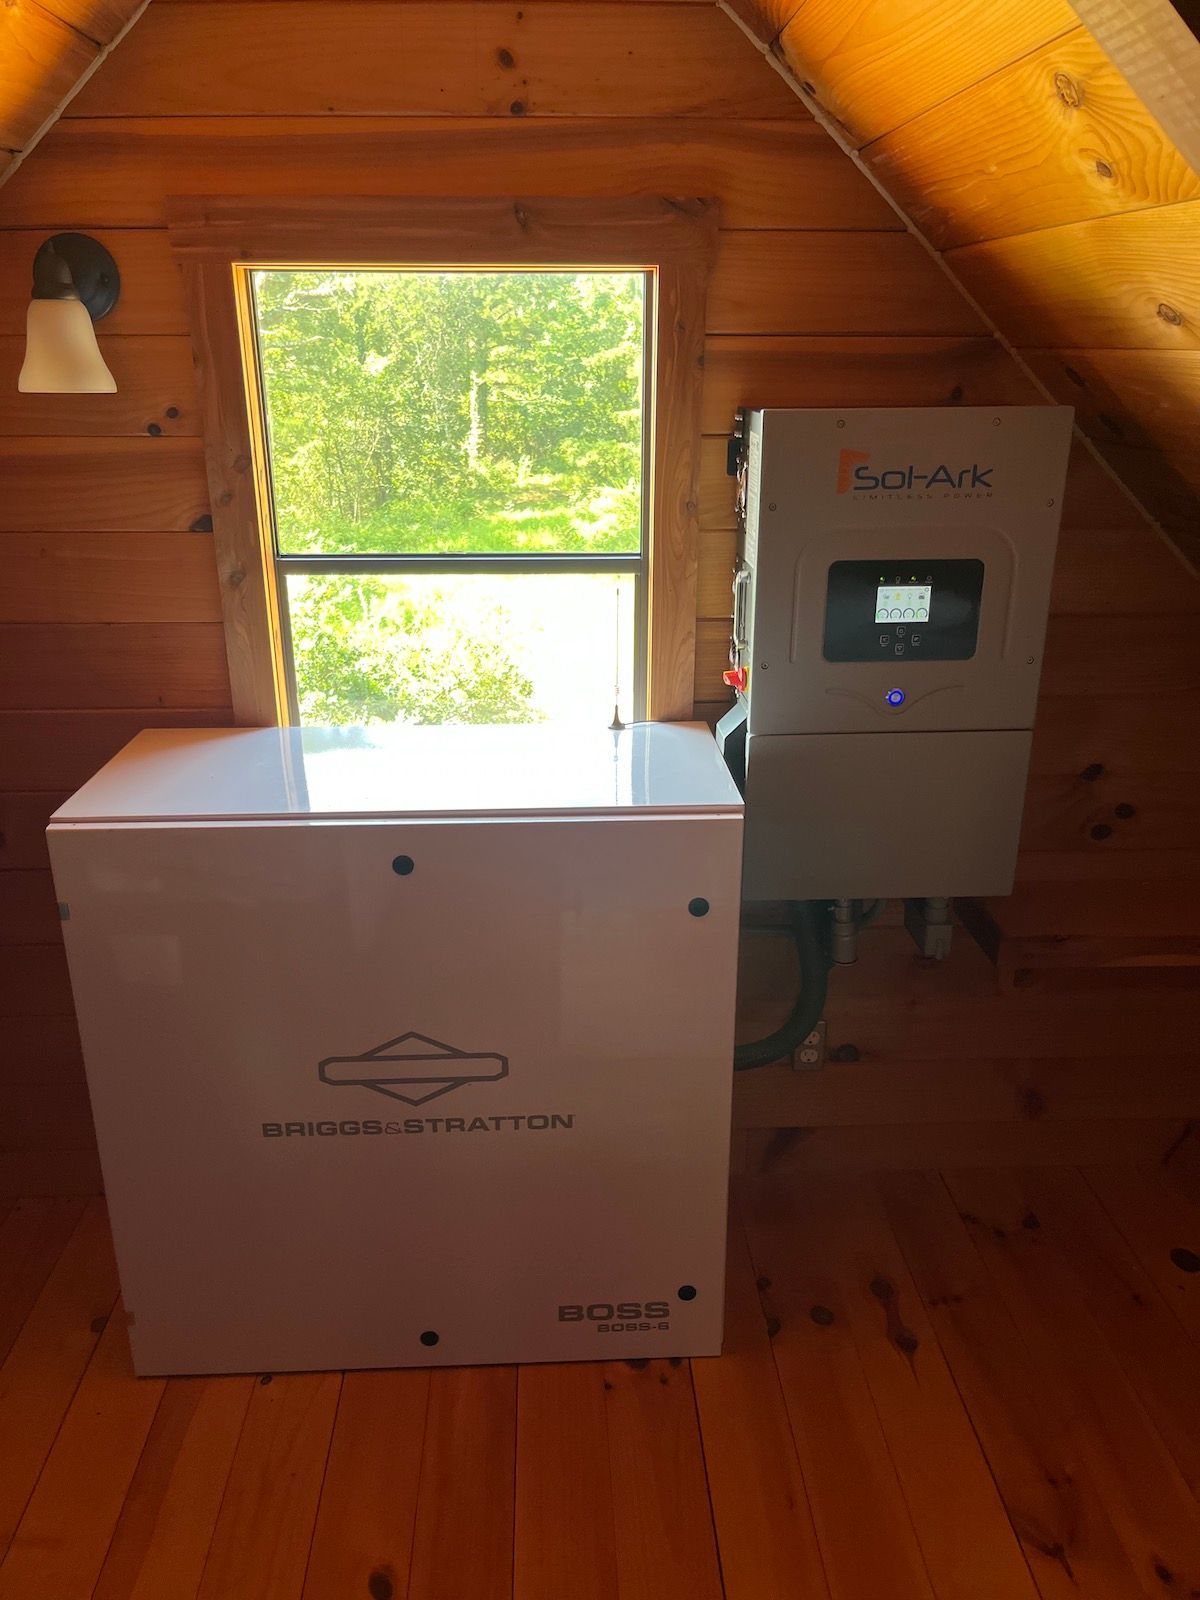 GenSpring Power Installs Sol-ark Inverters in Georgia to Give Homeowners the Best Possible Energy Storage